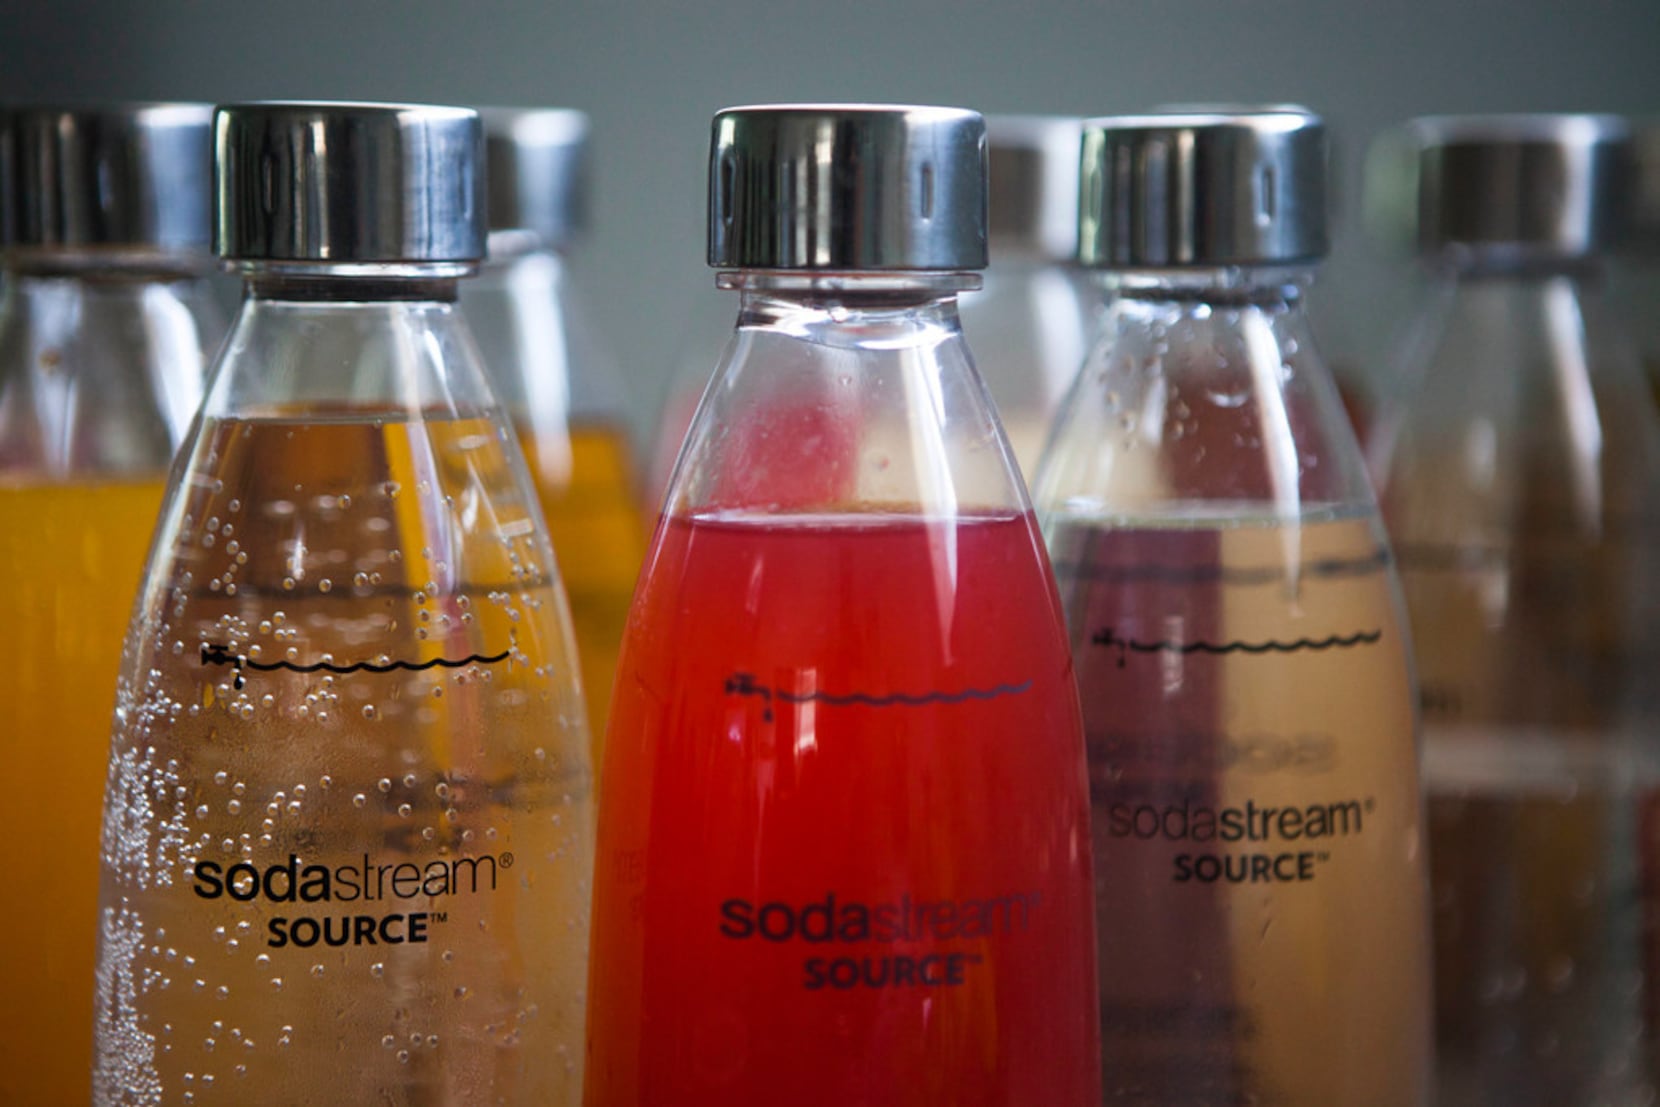 Keurig's Coke deal could be good for SodaStream